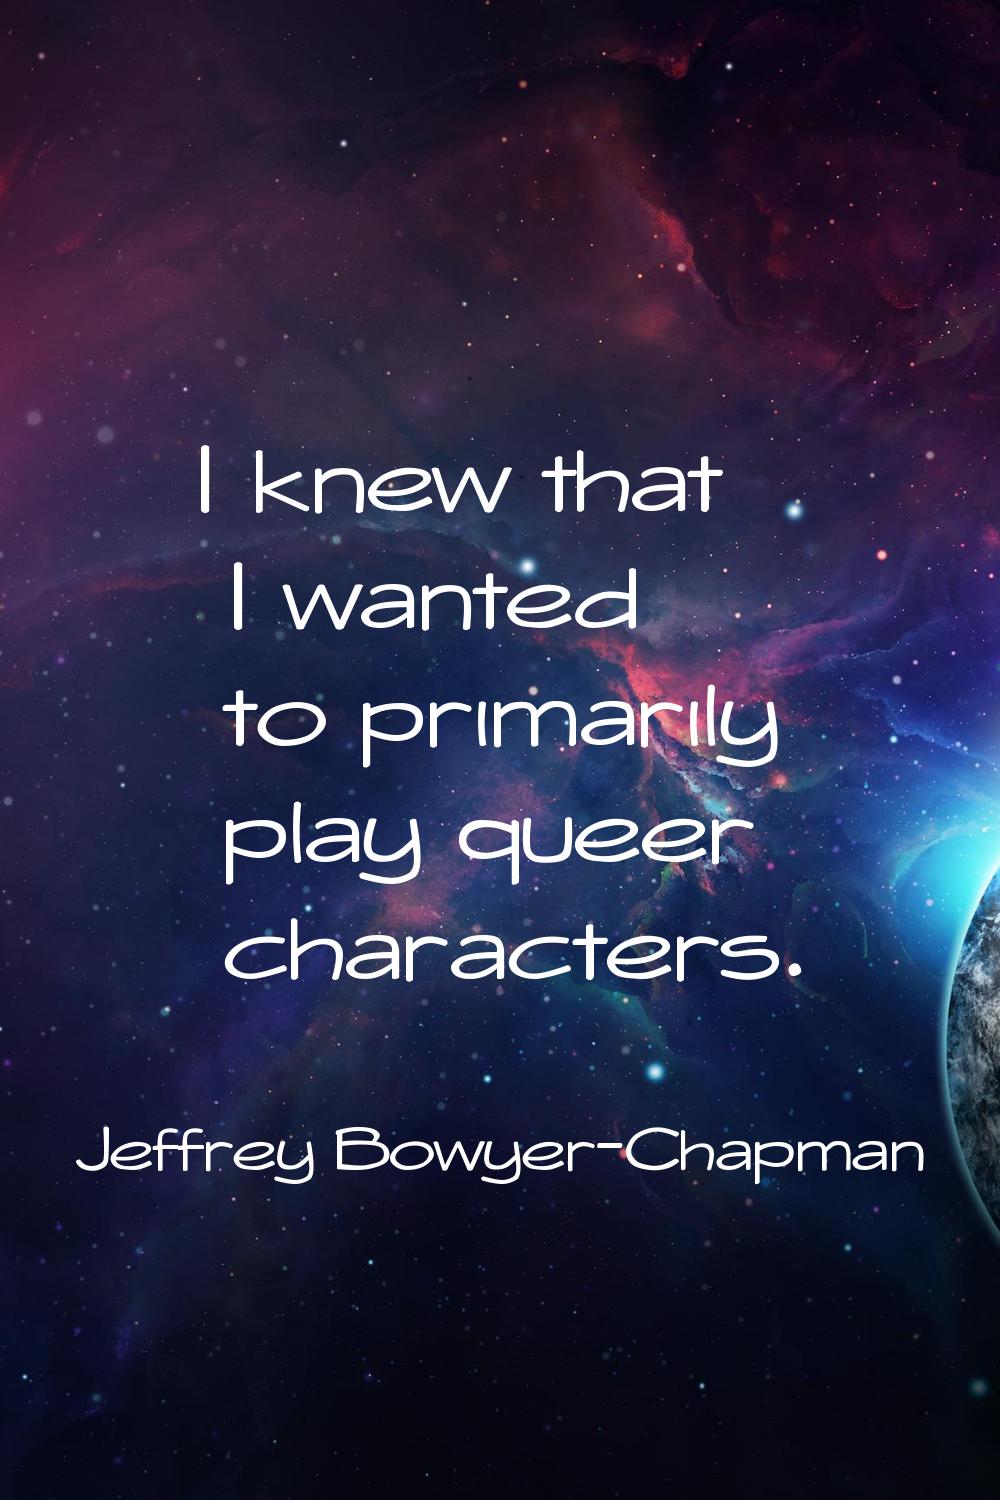 I knew that I wanted to primarily play queer characters.